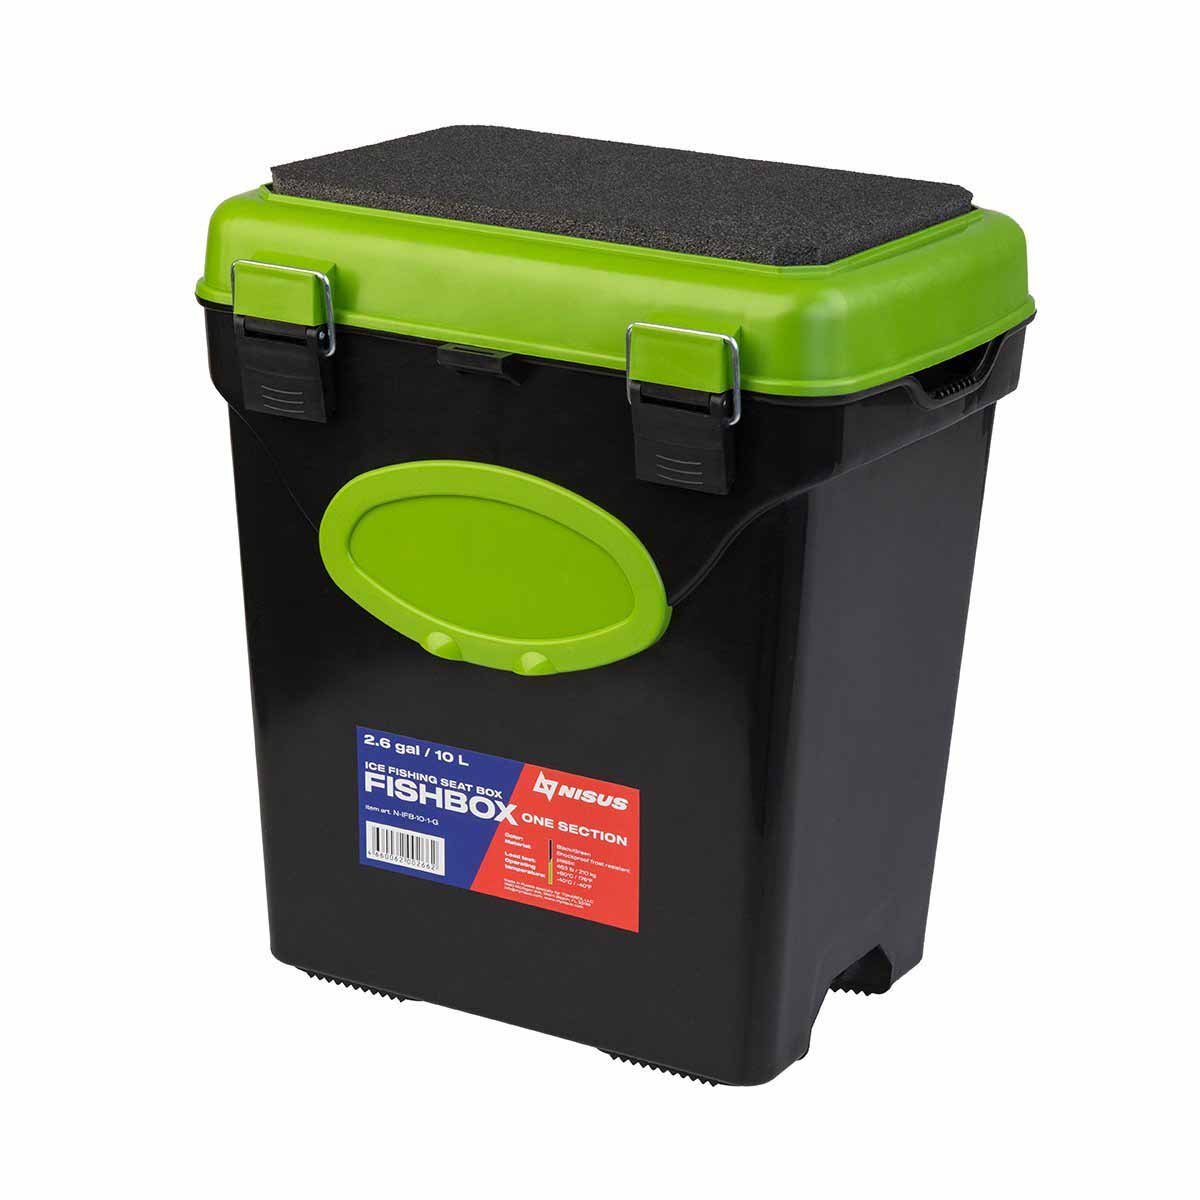 FishBox 10 liter SeatBox for Ice Fishing Tackle and Gear, green